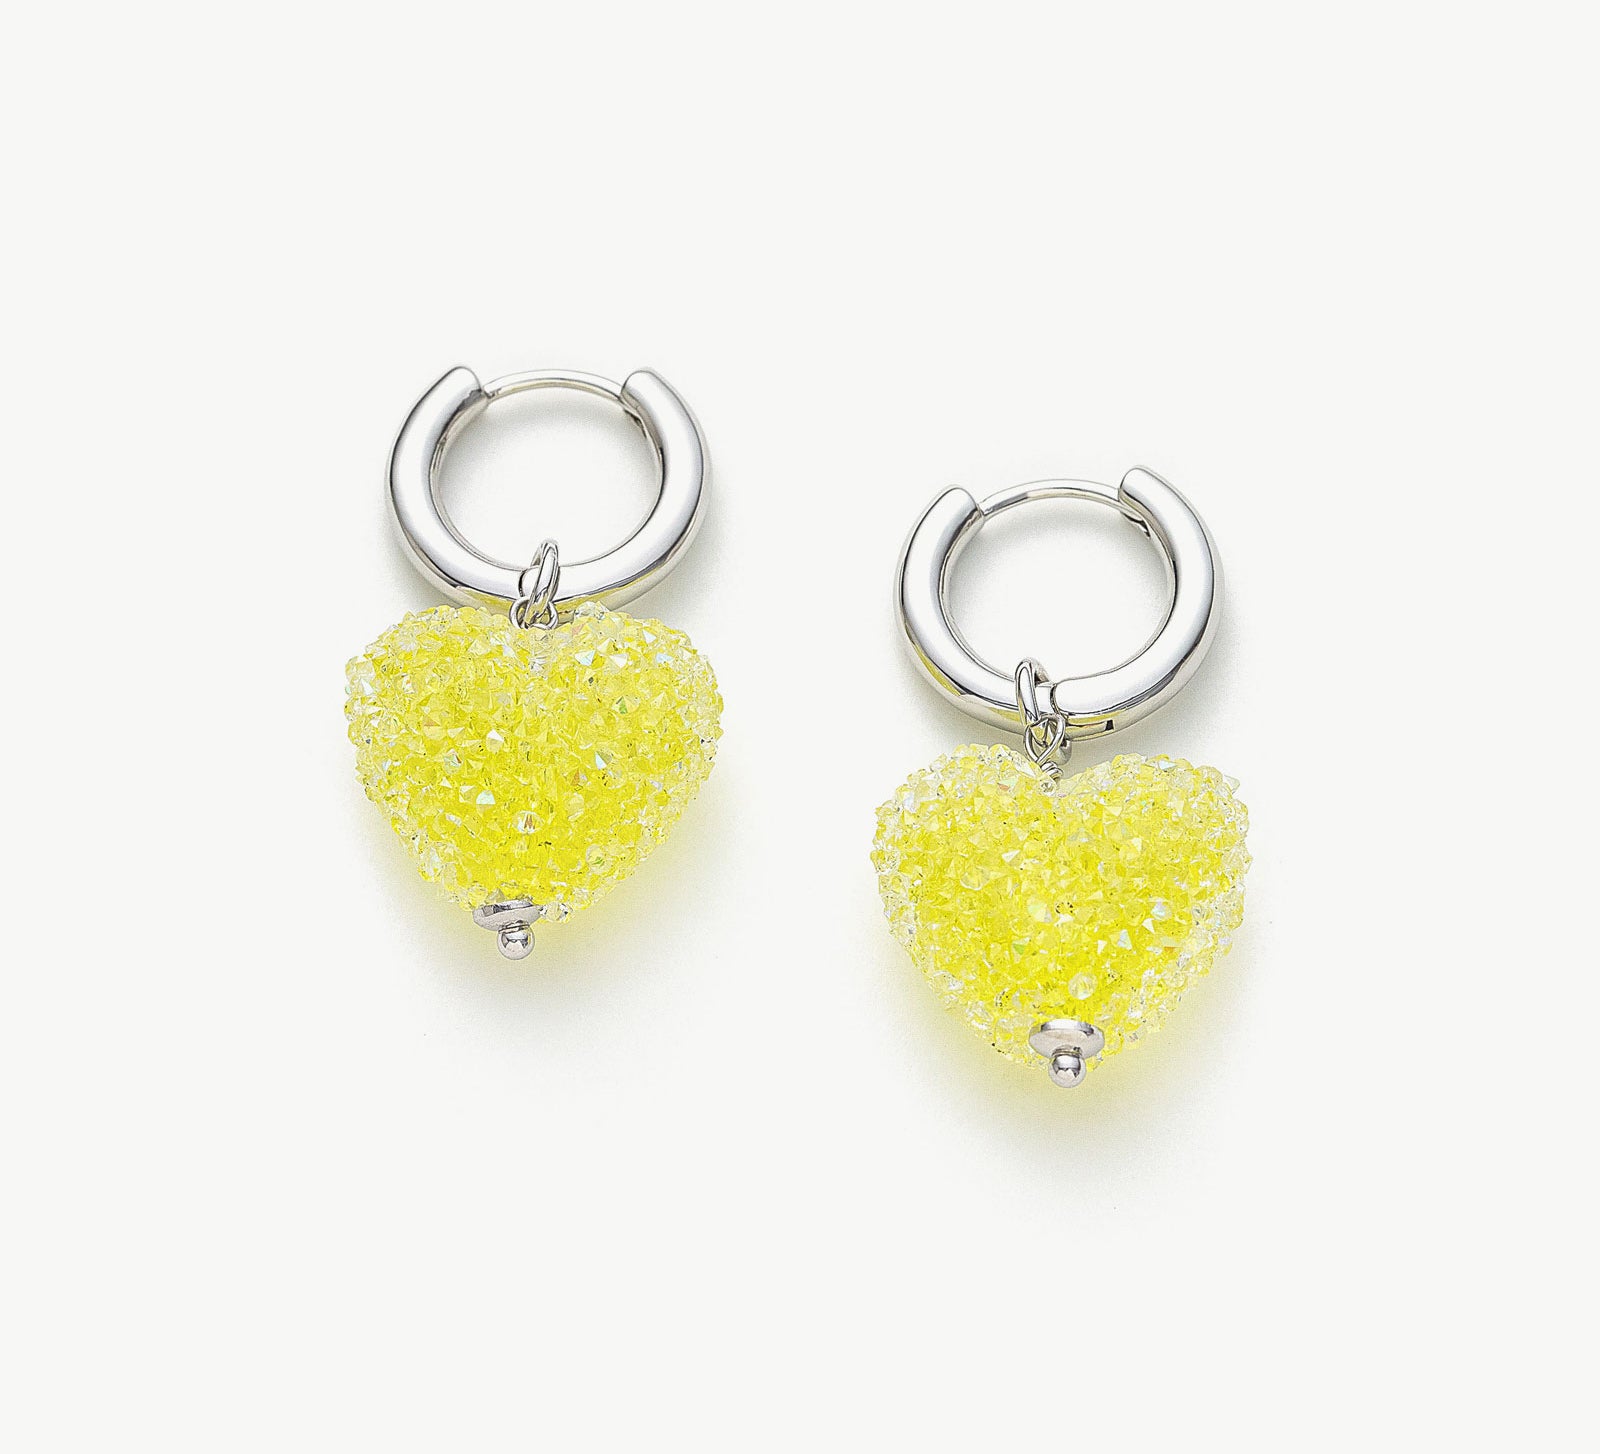 Shining Heart Hoop Earrings in Yellow, radiating with the warmth of sunlit charm, these hoops feature heart shapes in a delightful shade of yellow for a vibrant and luminous look